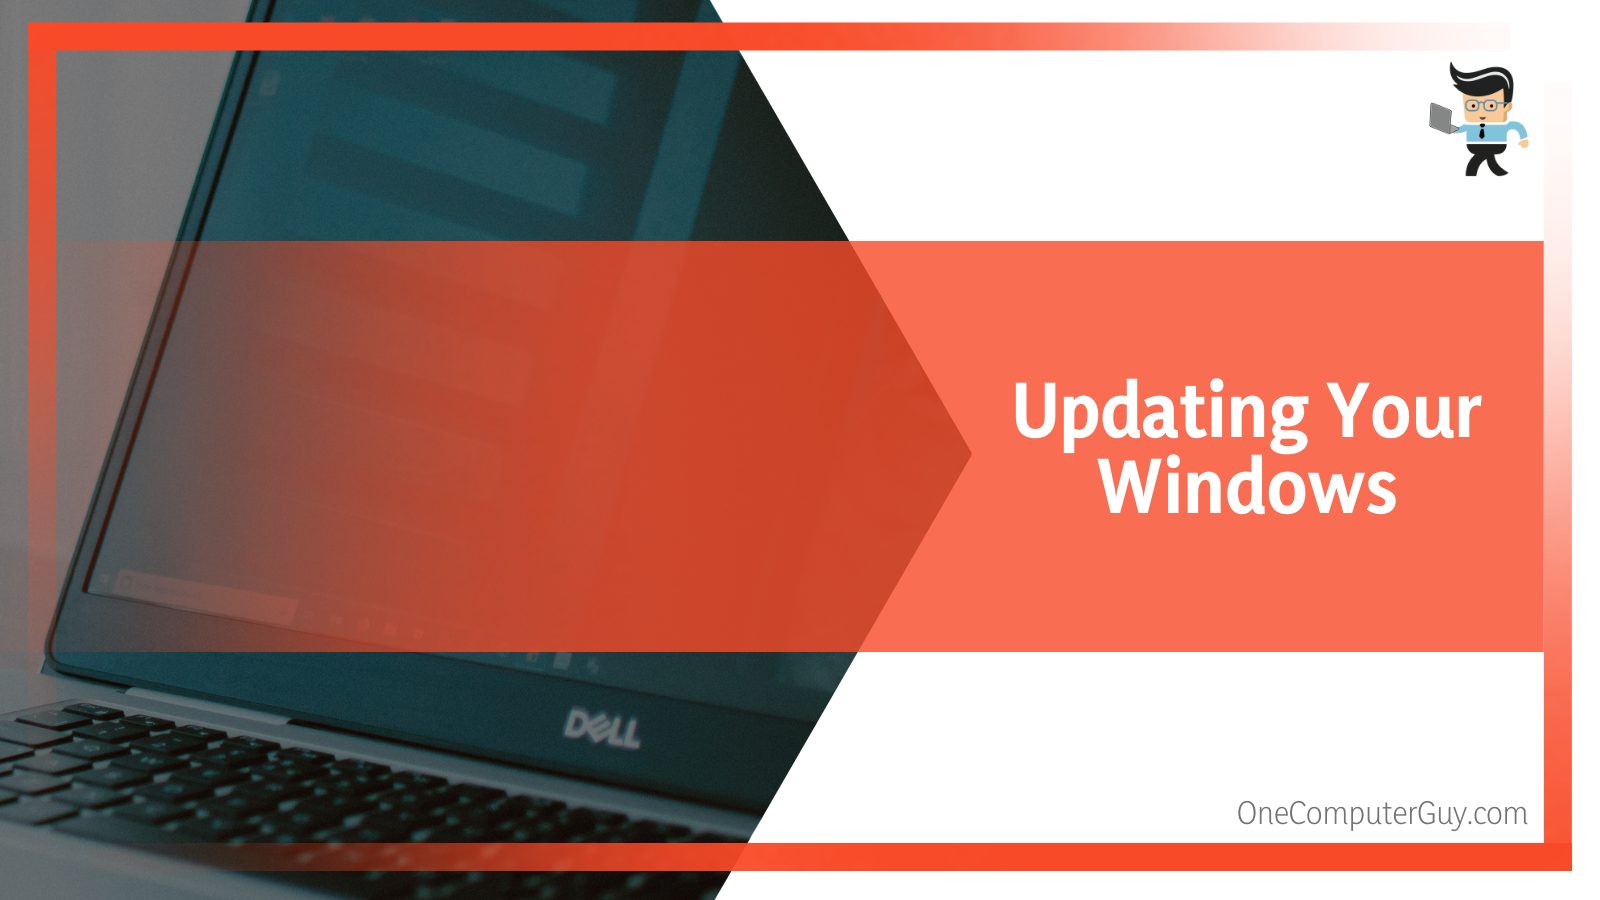 Updating Your Windows on Dell